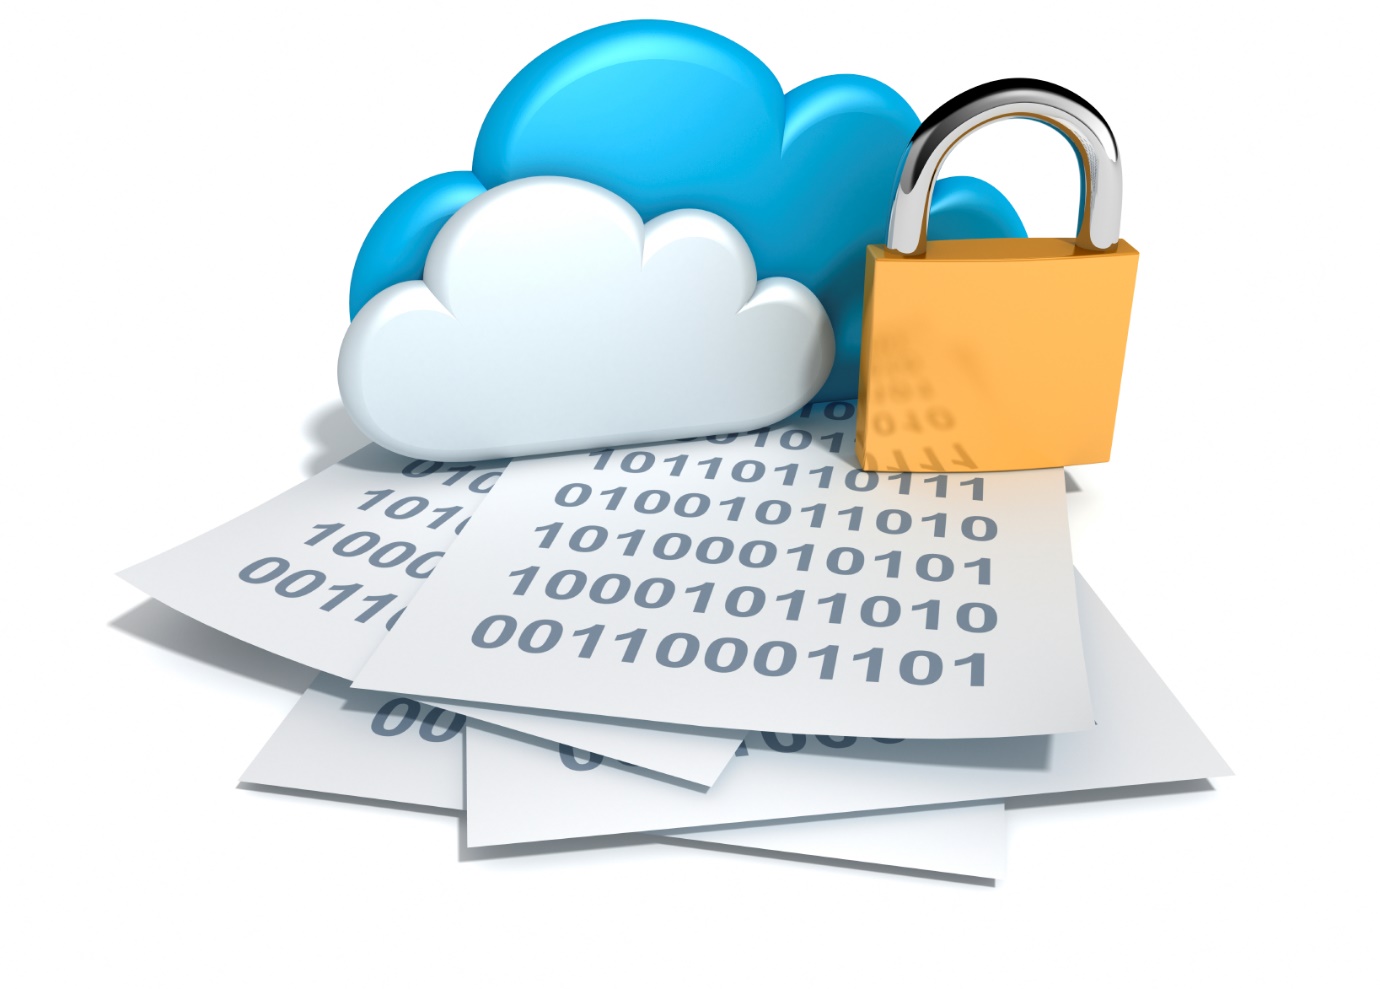 Security for the Cloud